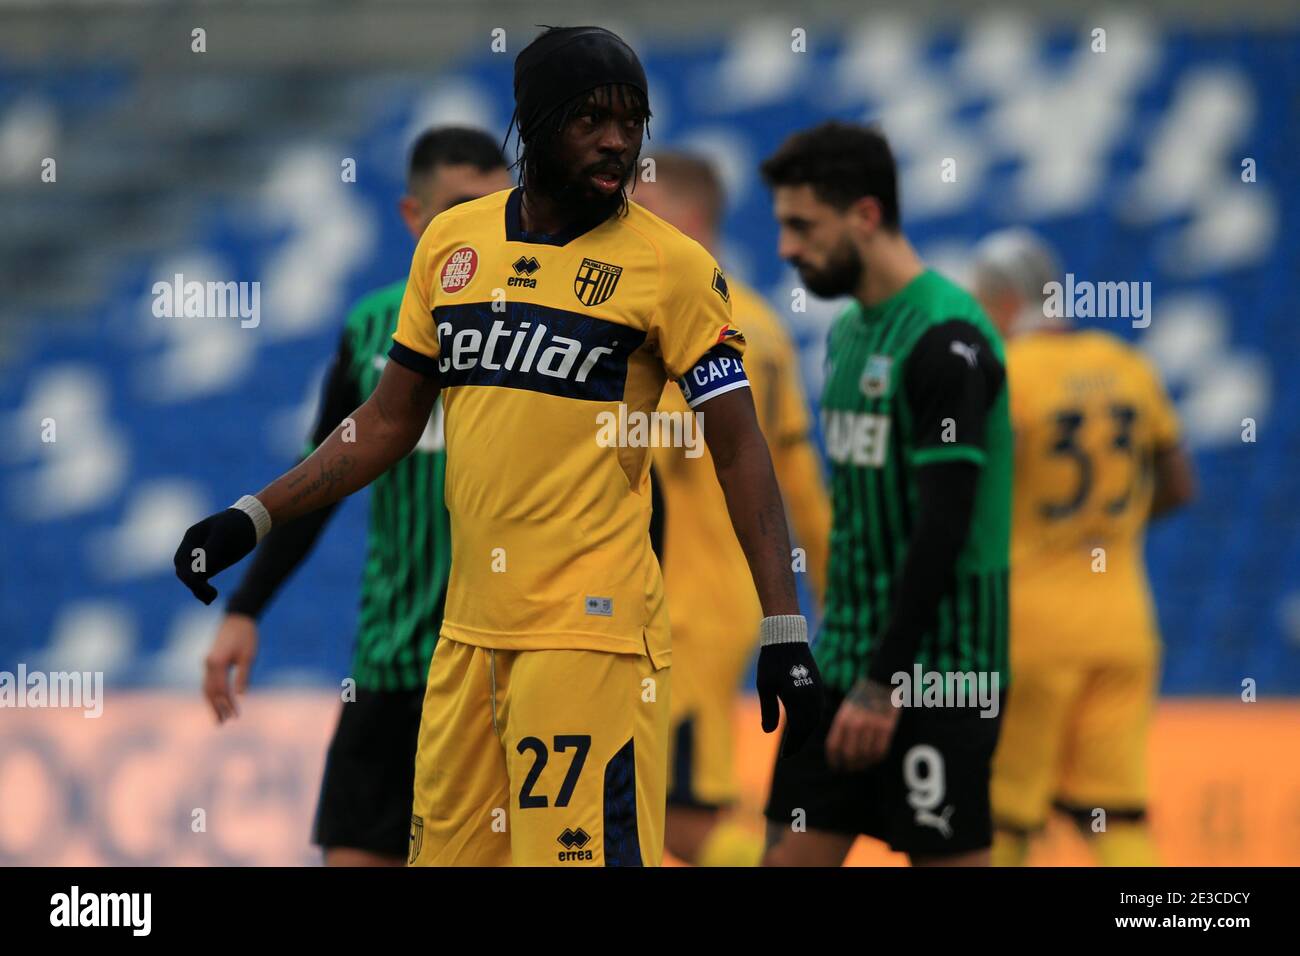 Gervinho (Parma) during the Serie A Tim match between US Sassuolo and Parma Calcio 1913 FC at Mapei Stadium Città del Tricolore on January, 17 2021 in Reggio Emilia, Italy. (Photo by Giuseppe Fama/Pacific Press/Sipa USA) Stock Photo